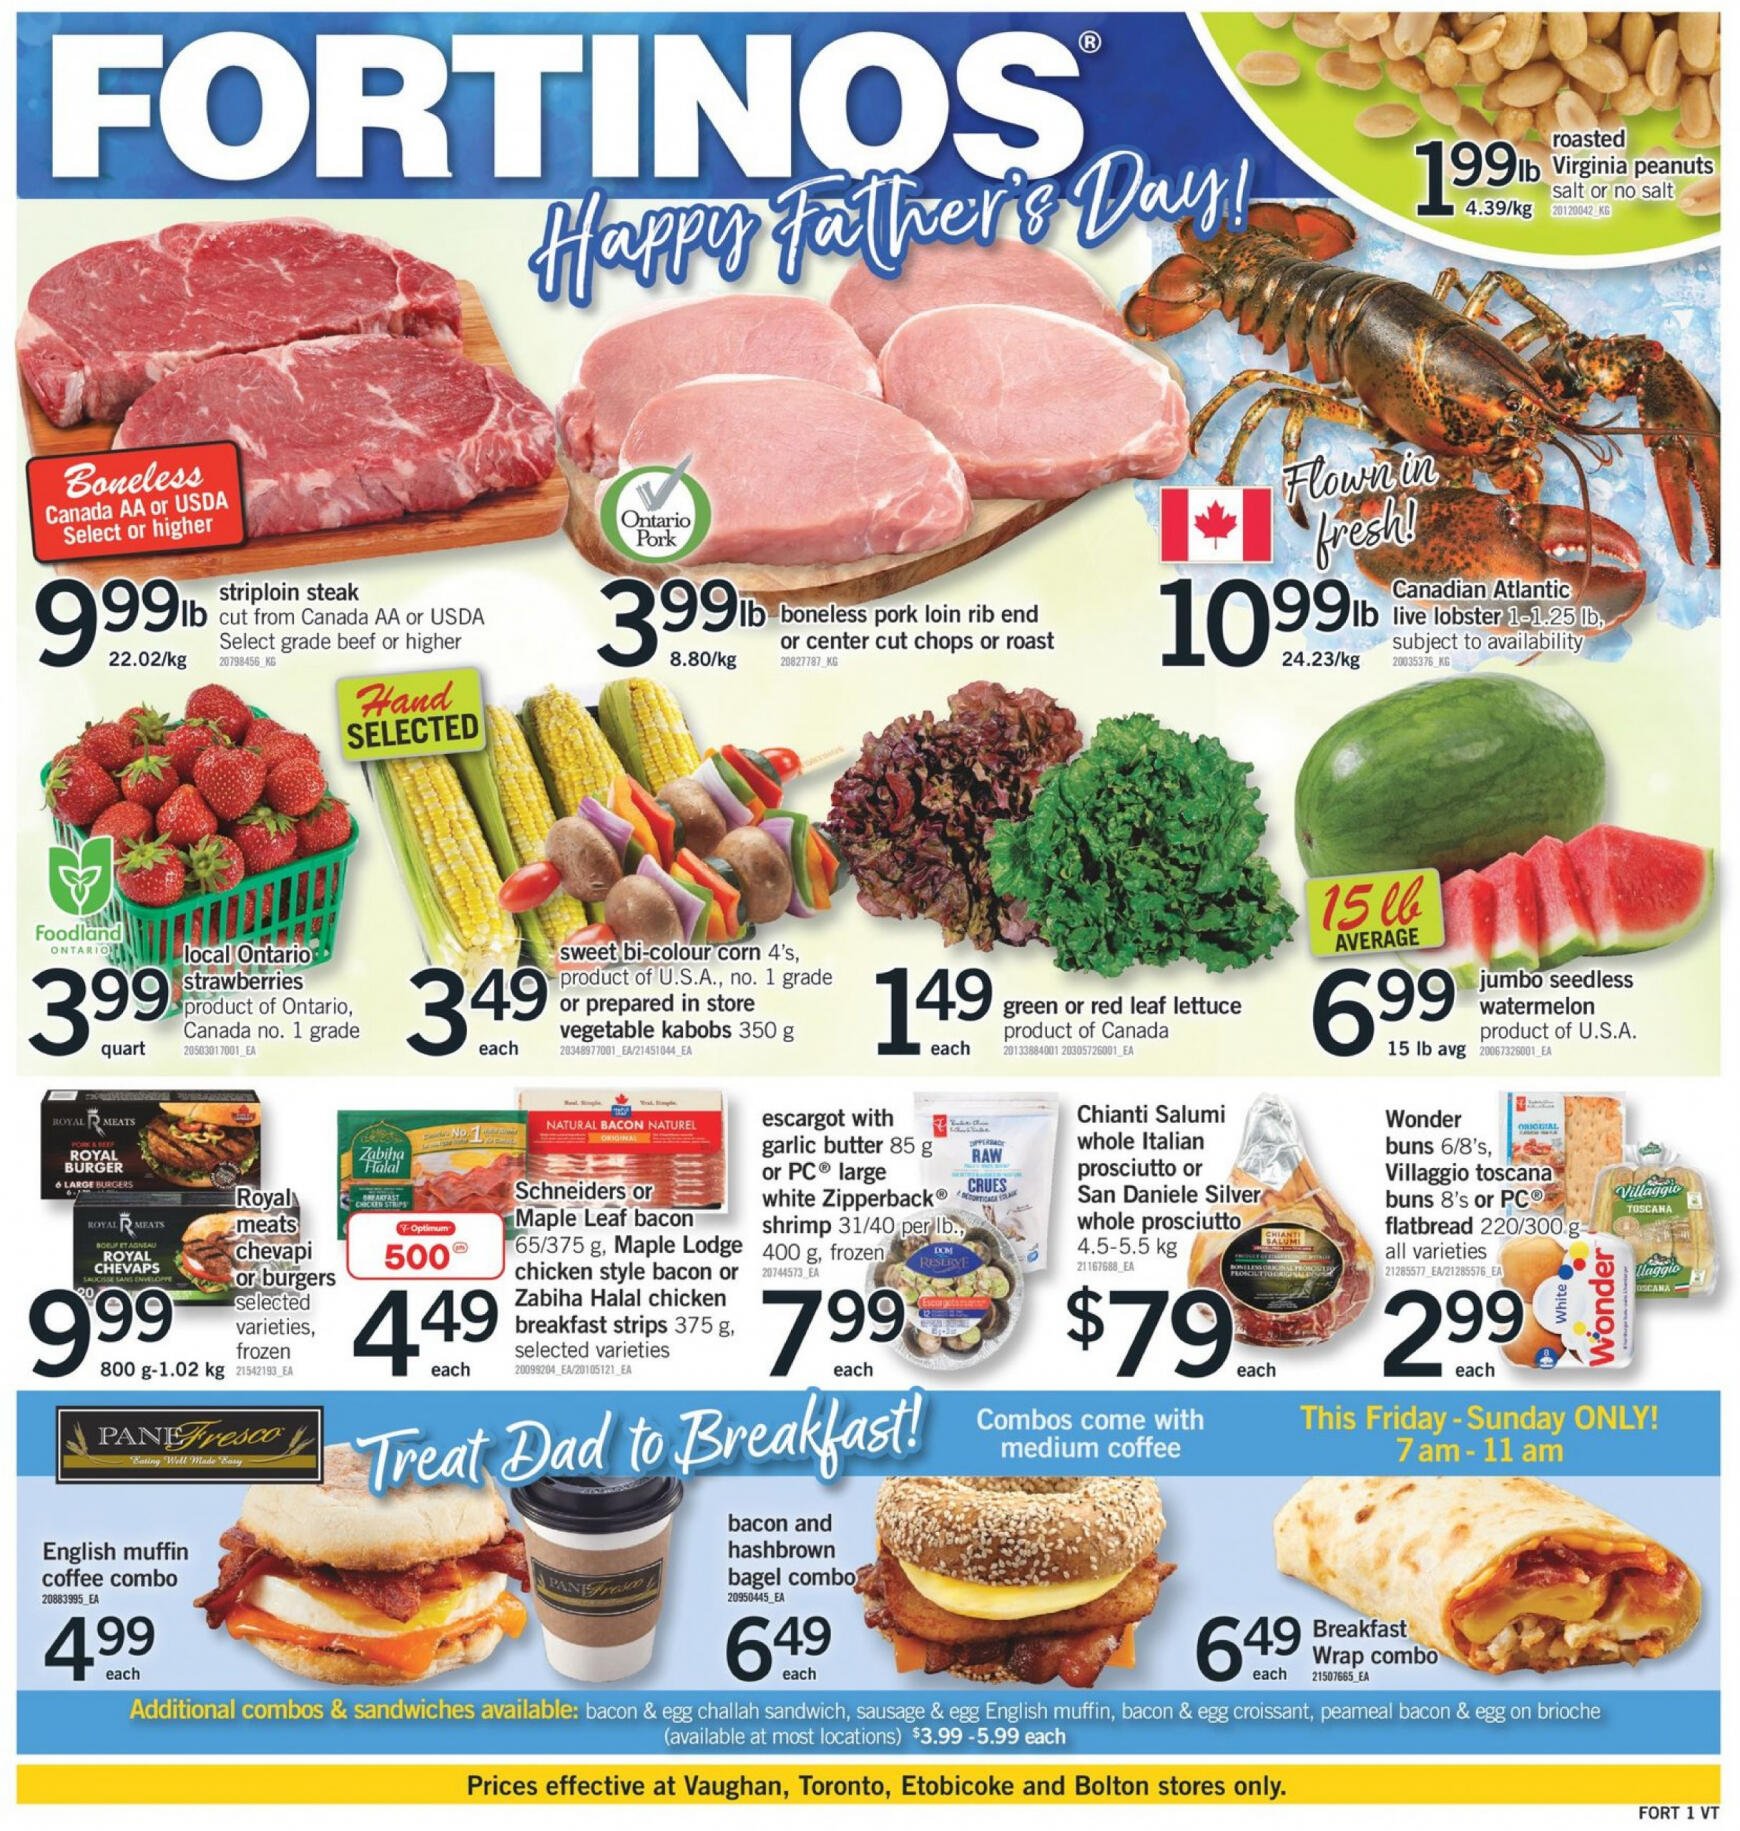 fortinos - Fortinos flyer current 13.06. - 19.06.